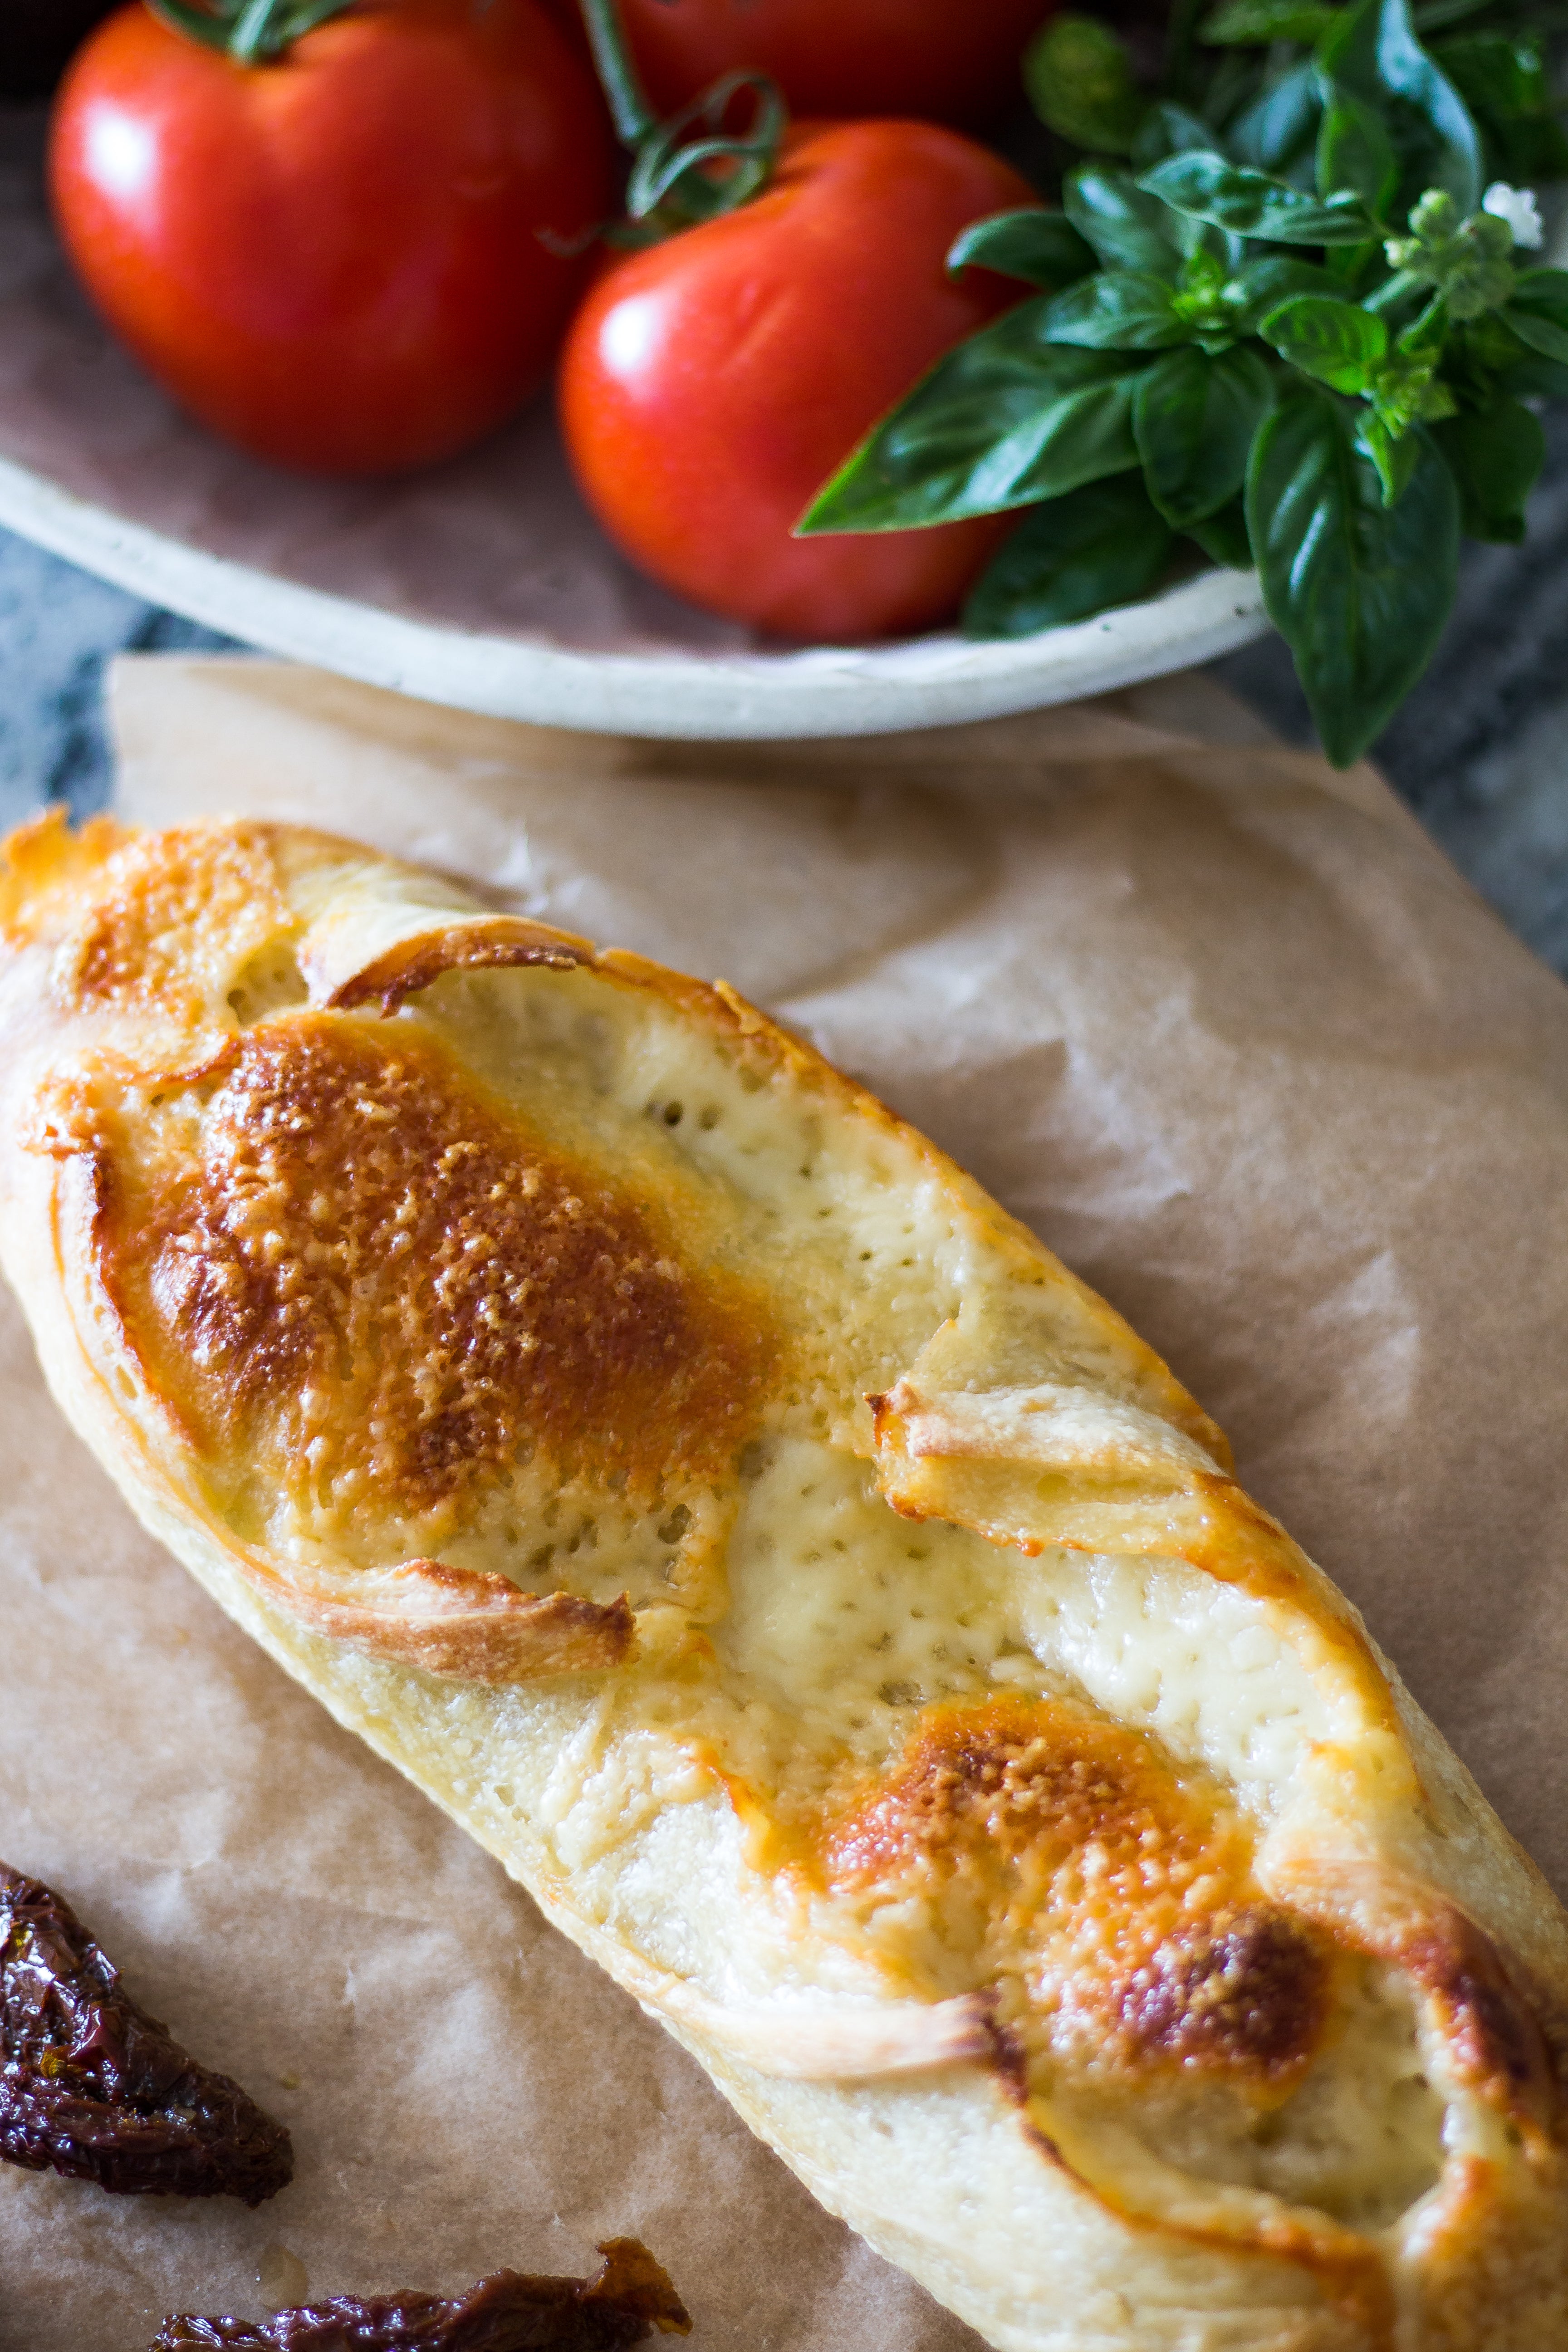 Swiss Baguette (Sourdough baguette with gruyere cheese)